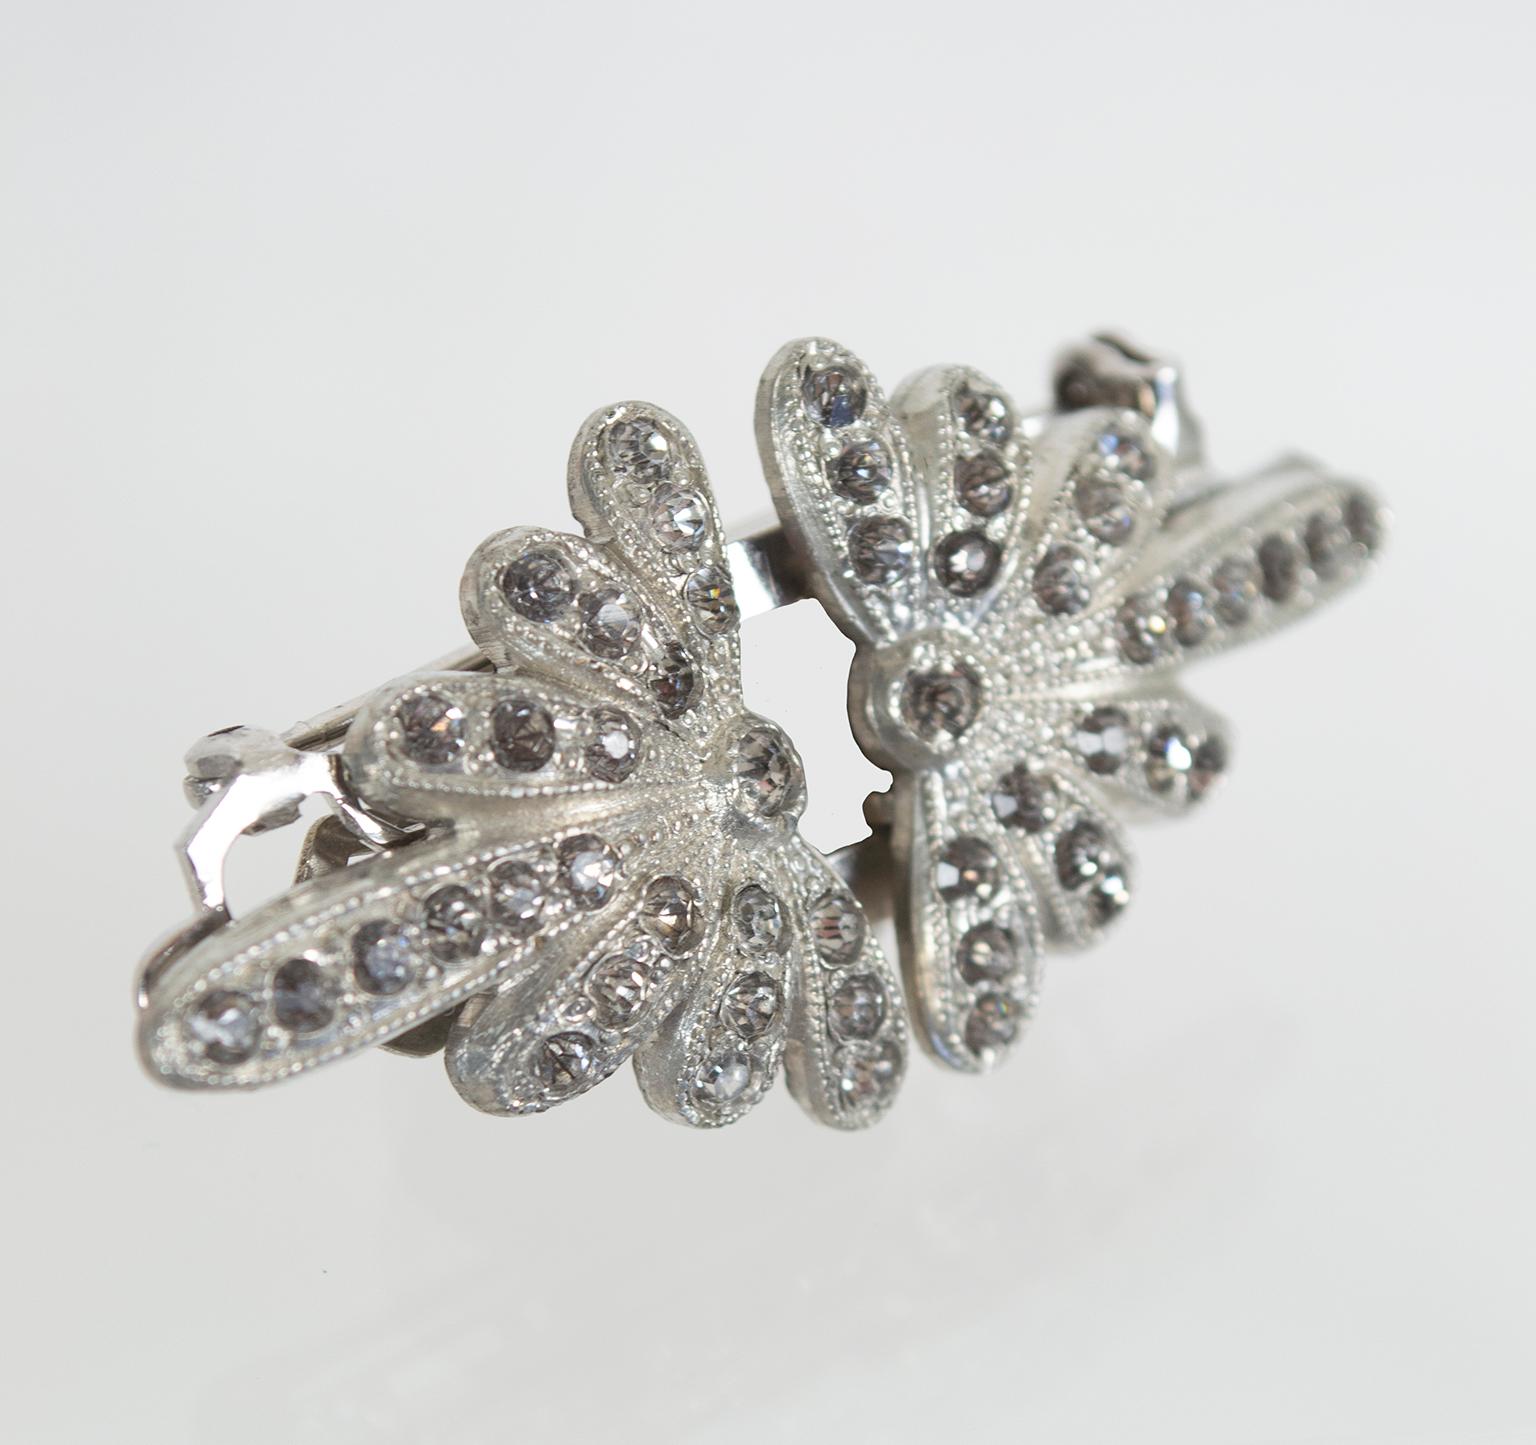 A patented design, this stunning Art Deco brooch comes apart so its pieces may also be used as dress clips. Brains AND beauty? A double threat.

Art Deco brooch featuring a radiating ovoid starburst decorated with minuscule marcasite stones; pieces